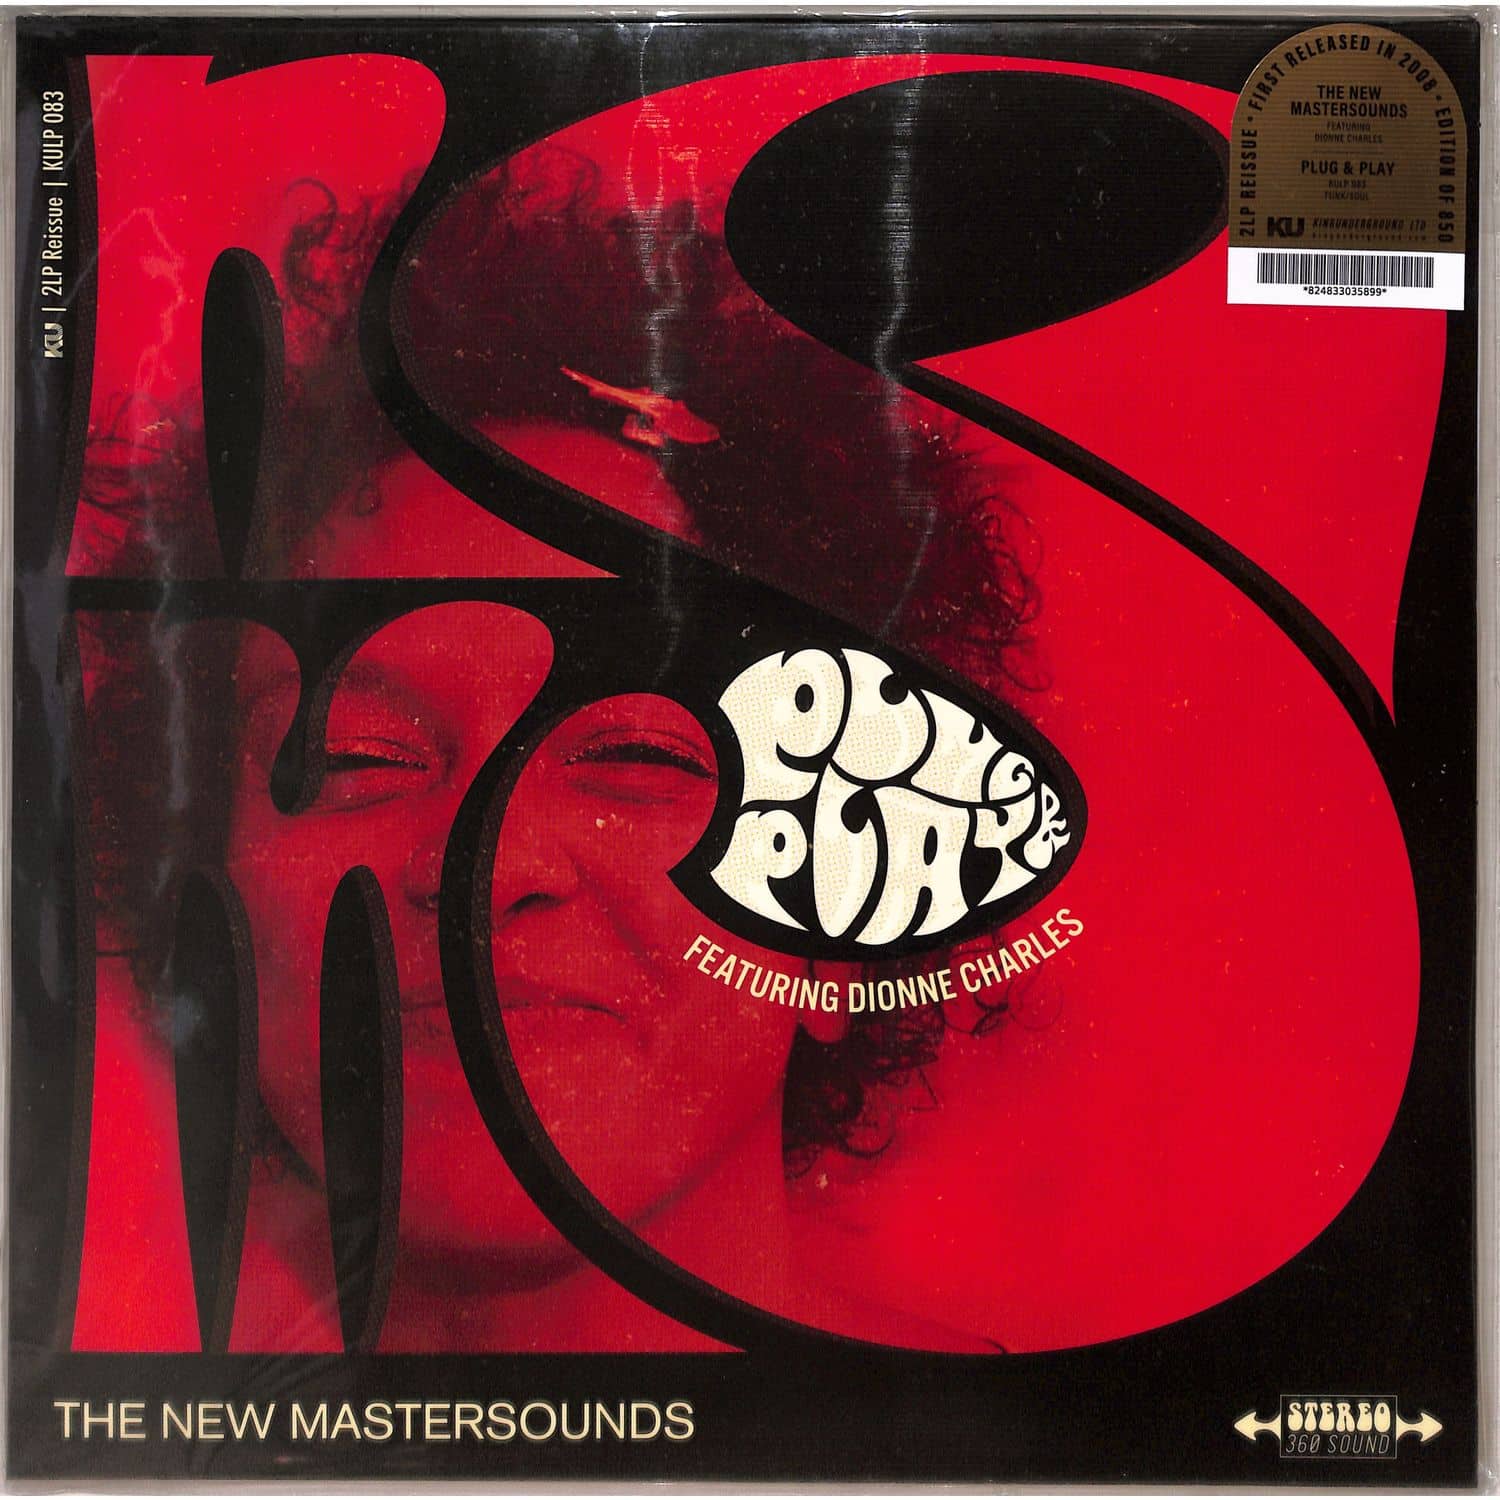 The New Mastersounds - PLUG & PLAY 